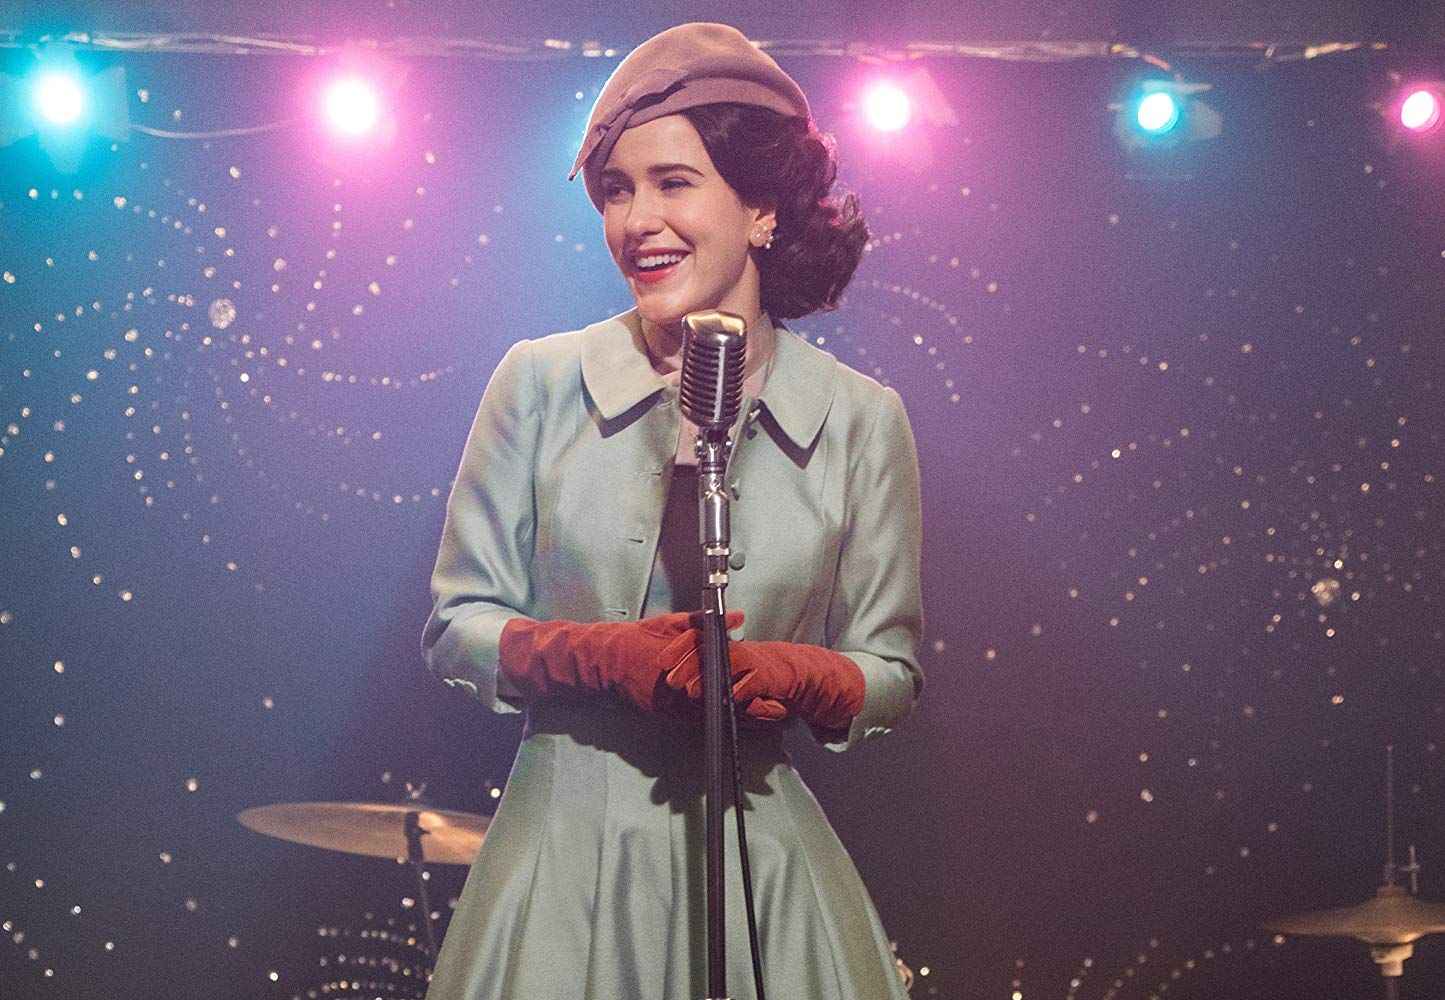 Is the marvelous mrs maisel based on a true person Which Marvelous Mrs Maisel Characters Are Based On Real People